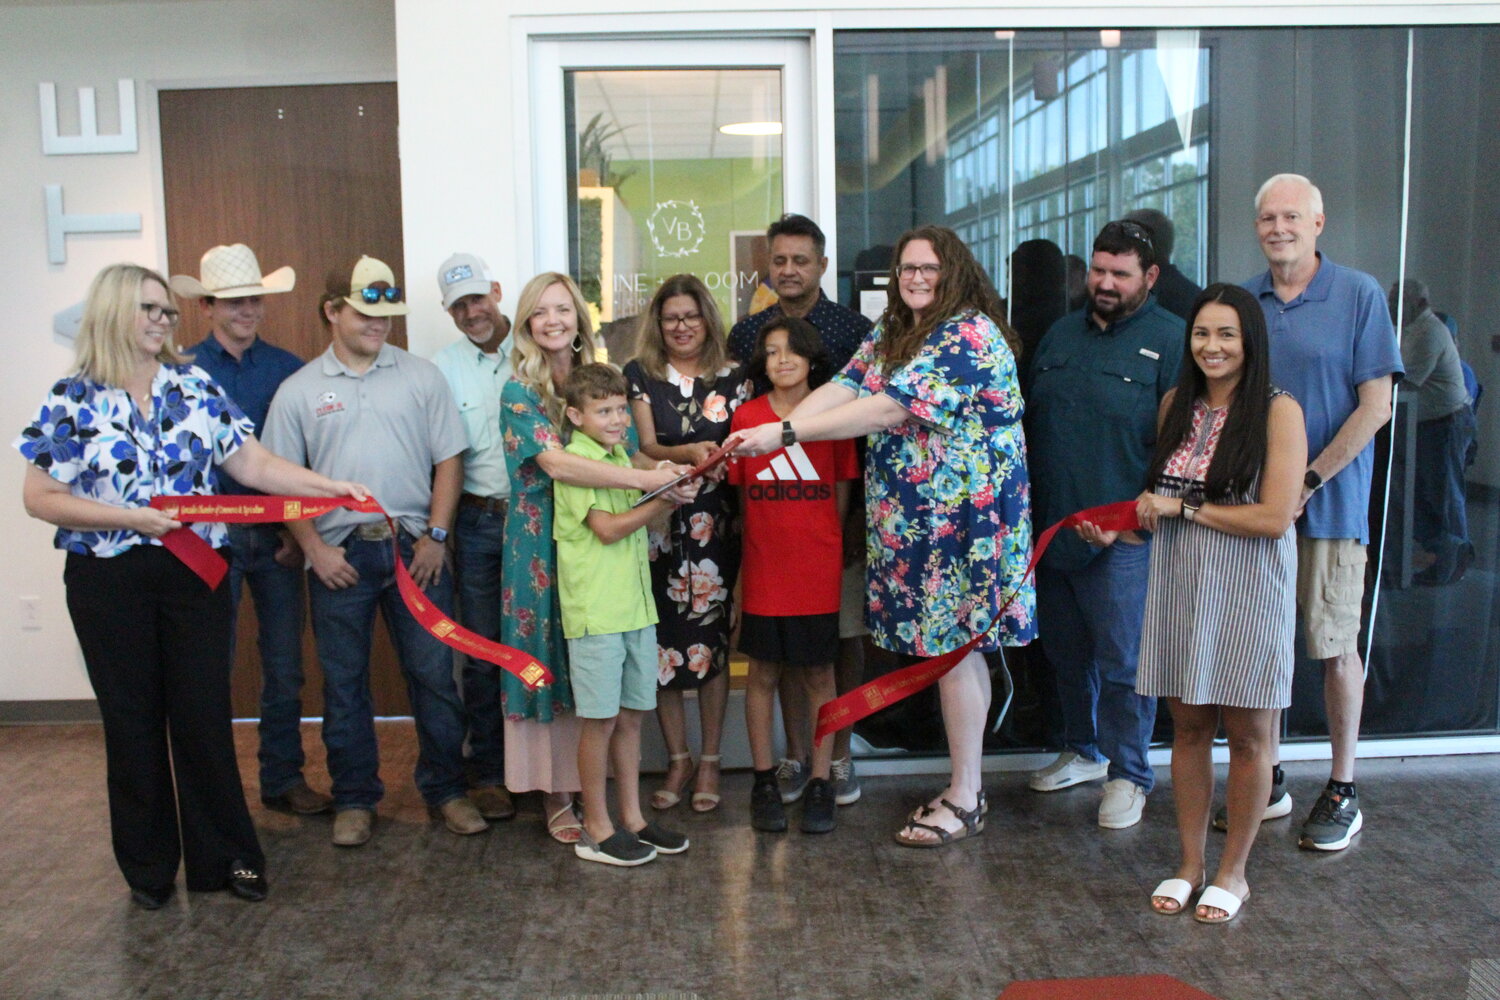 Vine & Bloom Counseling opens in second location in Gonzales  (first location in Shiner) at the Thrive Healthplex with a ribbon cutting ceremony Tuesday, June 11.